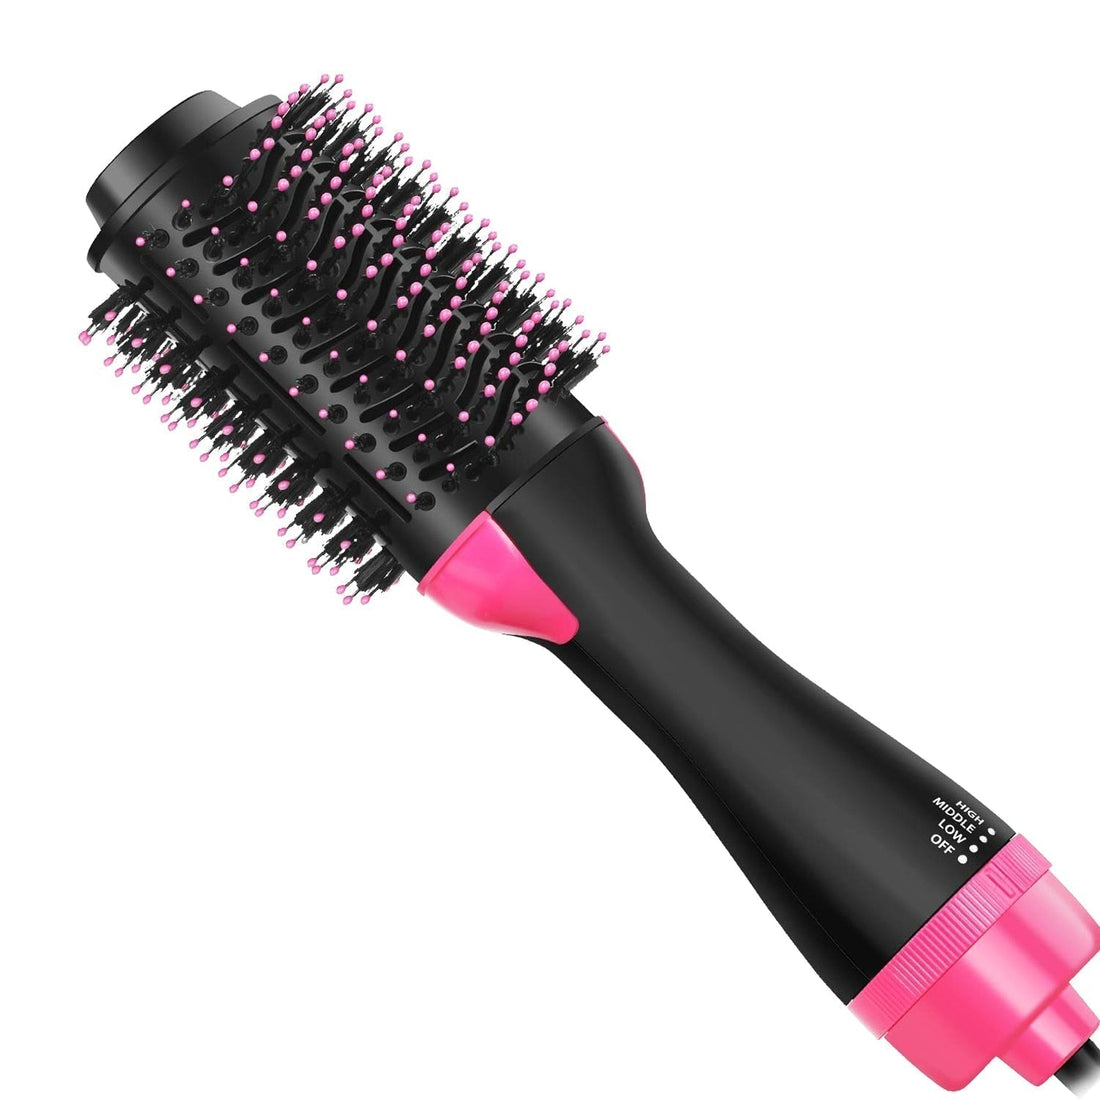 Hair Dryer and Comb - Skin Care Hair Beauty